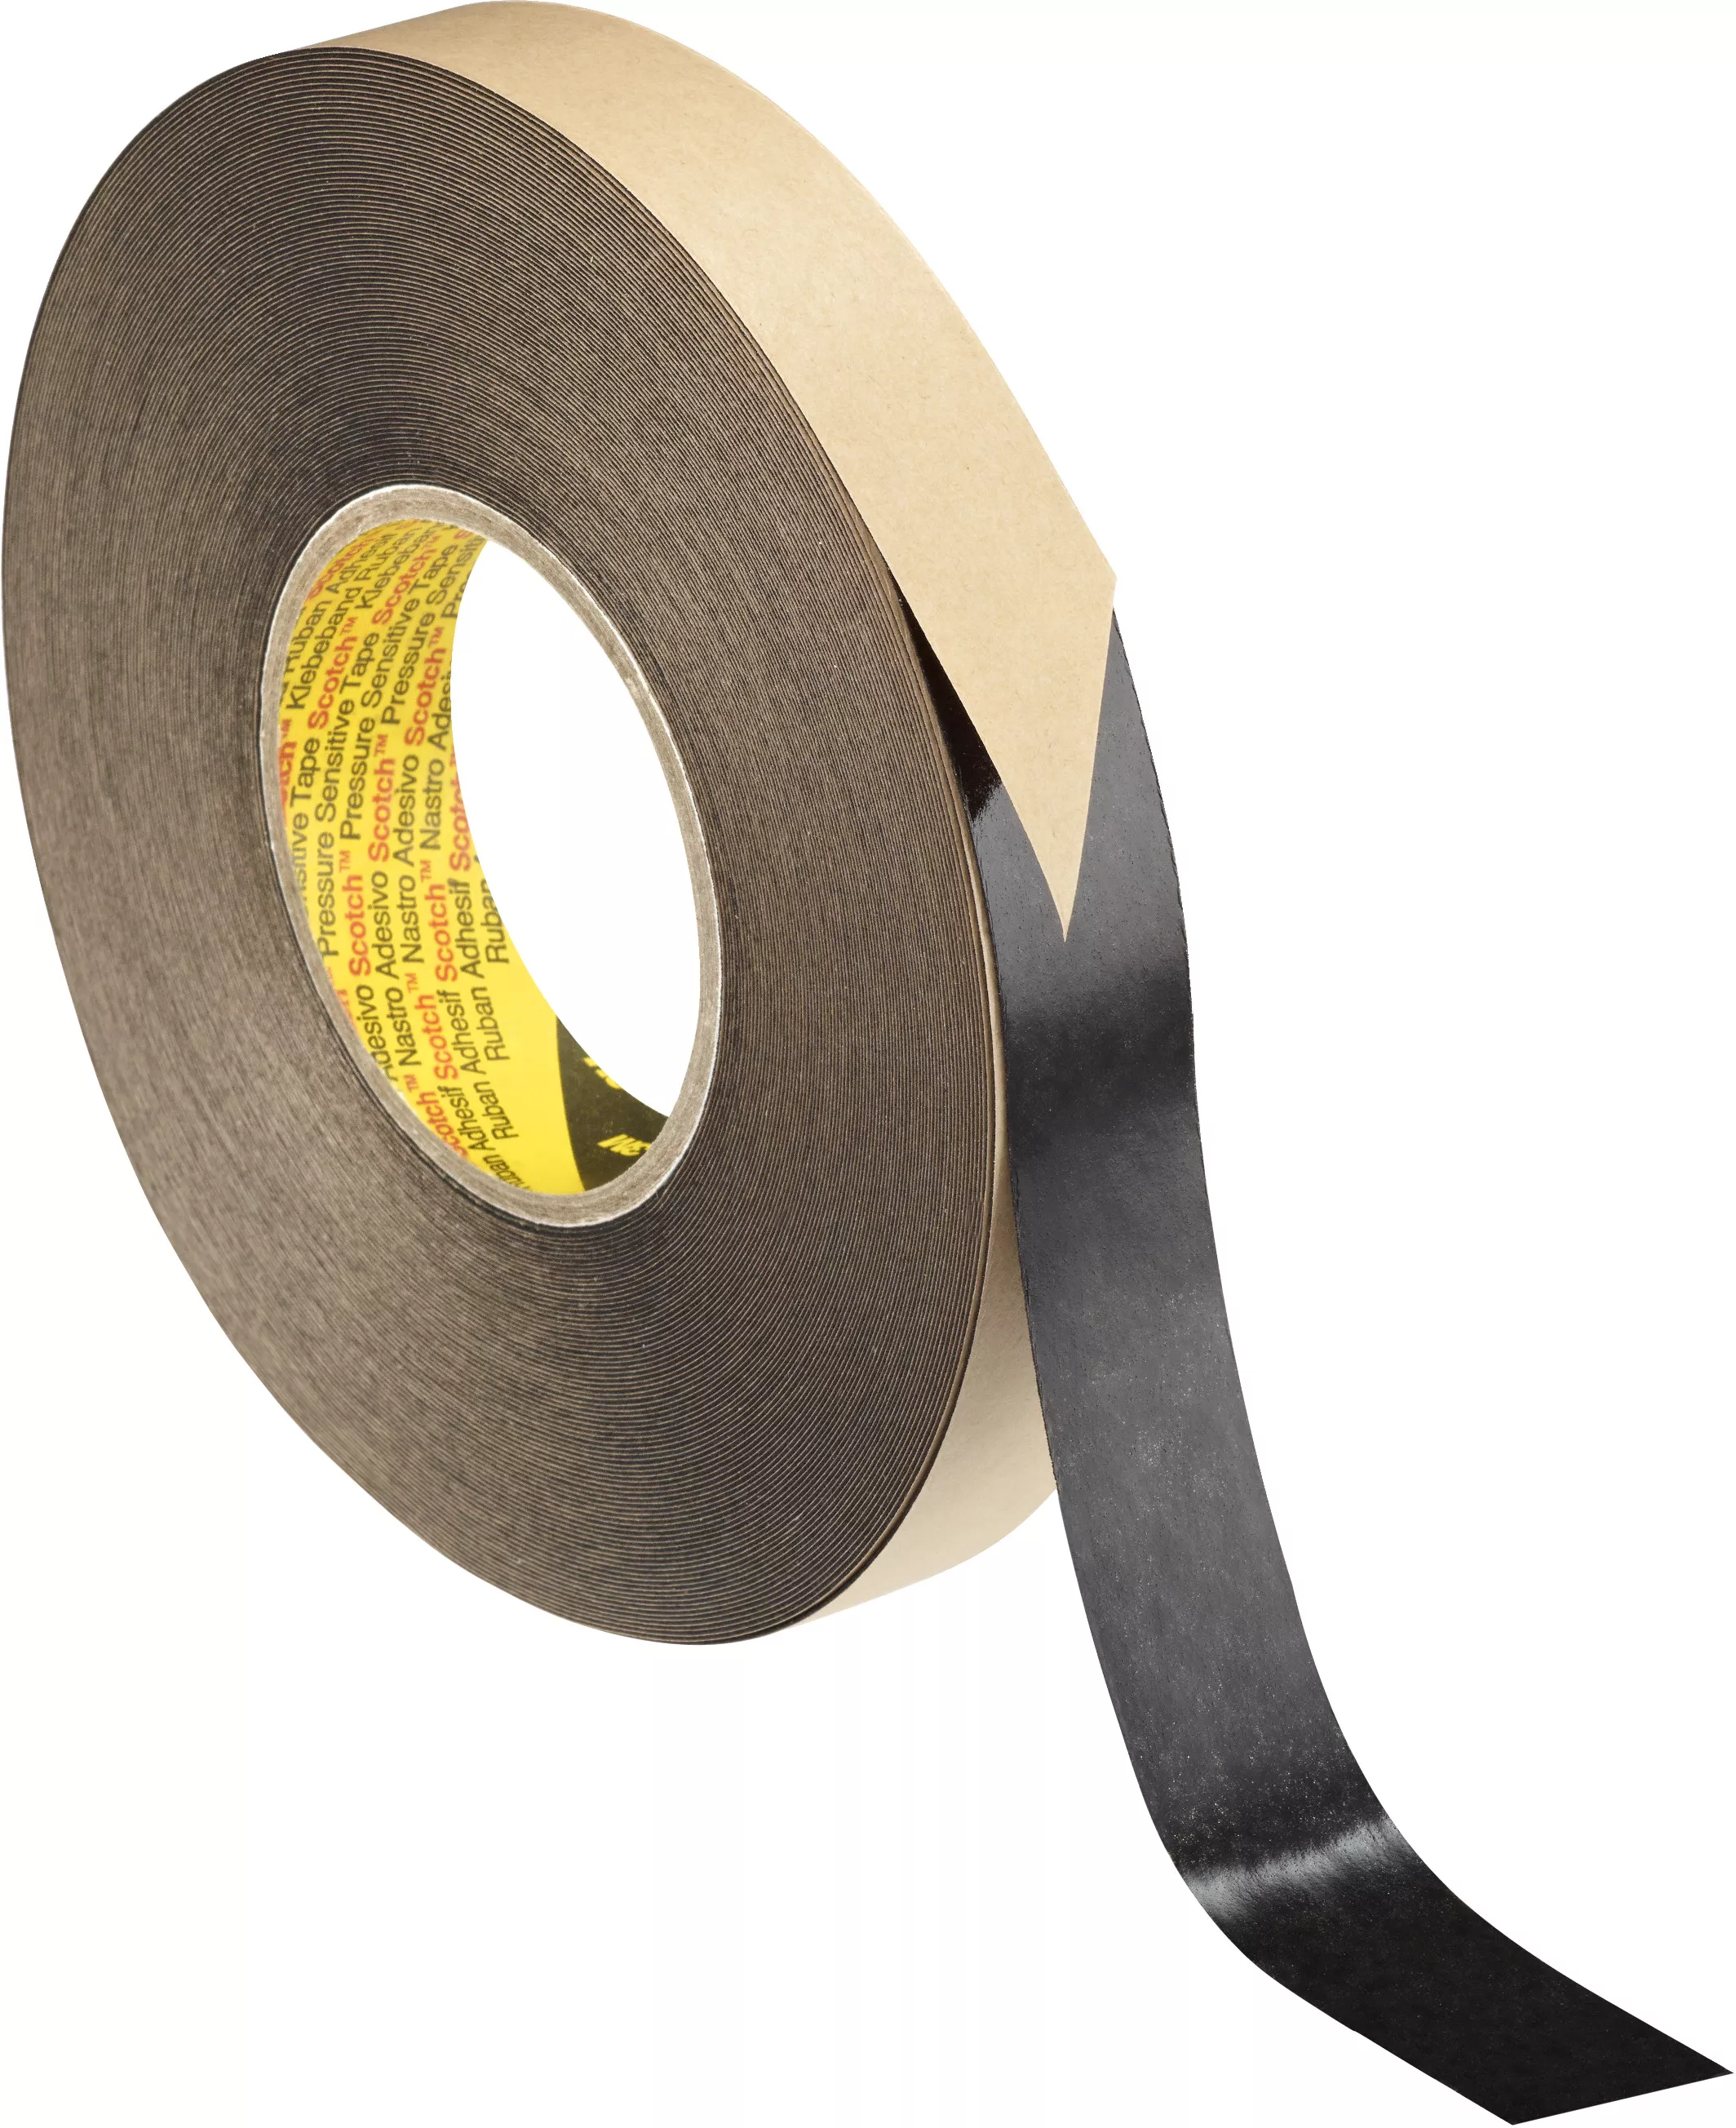 3M™ Conformable Sound Management Film Tape 9343, Black, 1 in x 36 yd, 1
Roll/Case